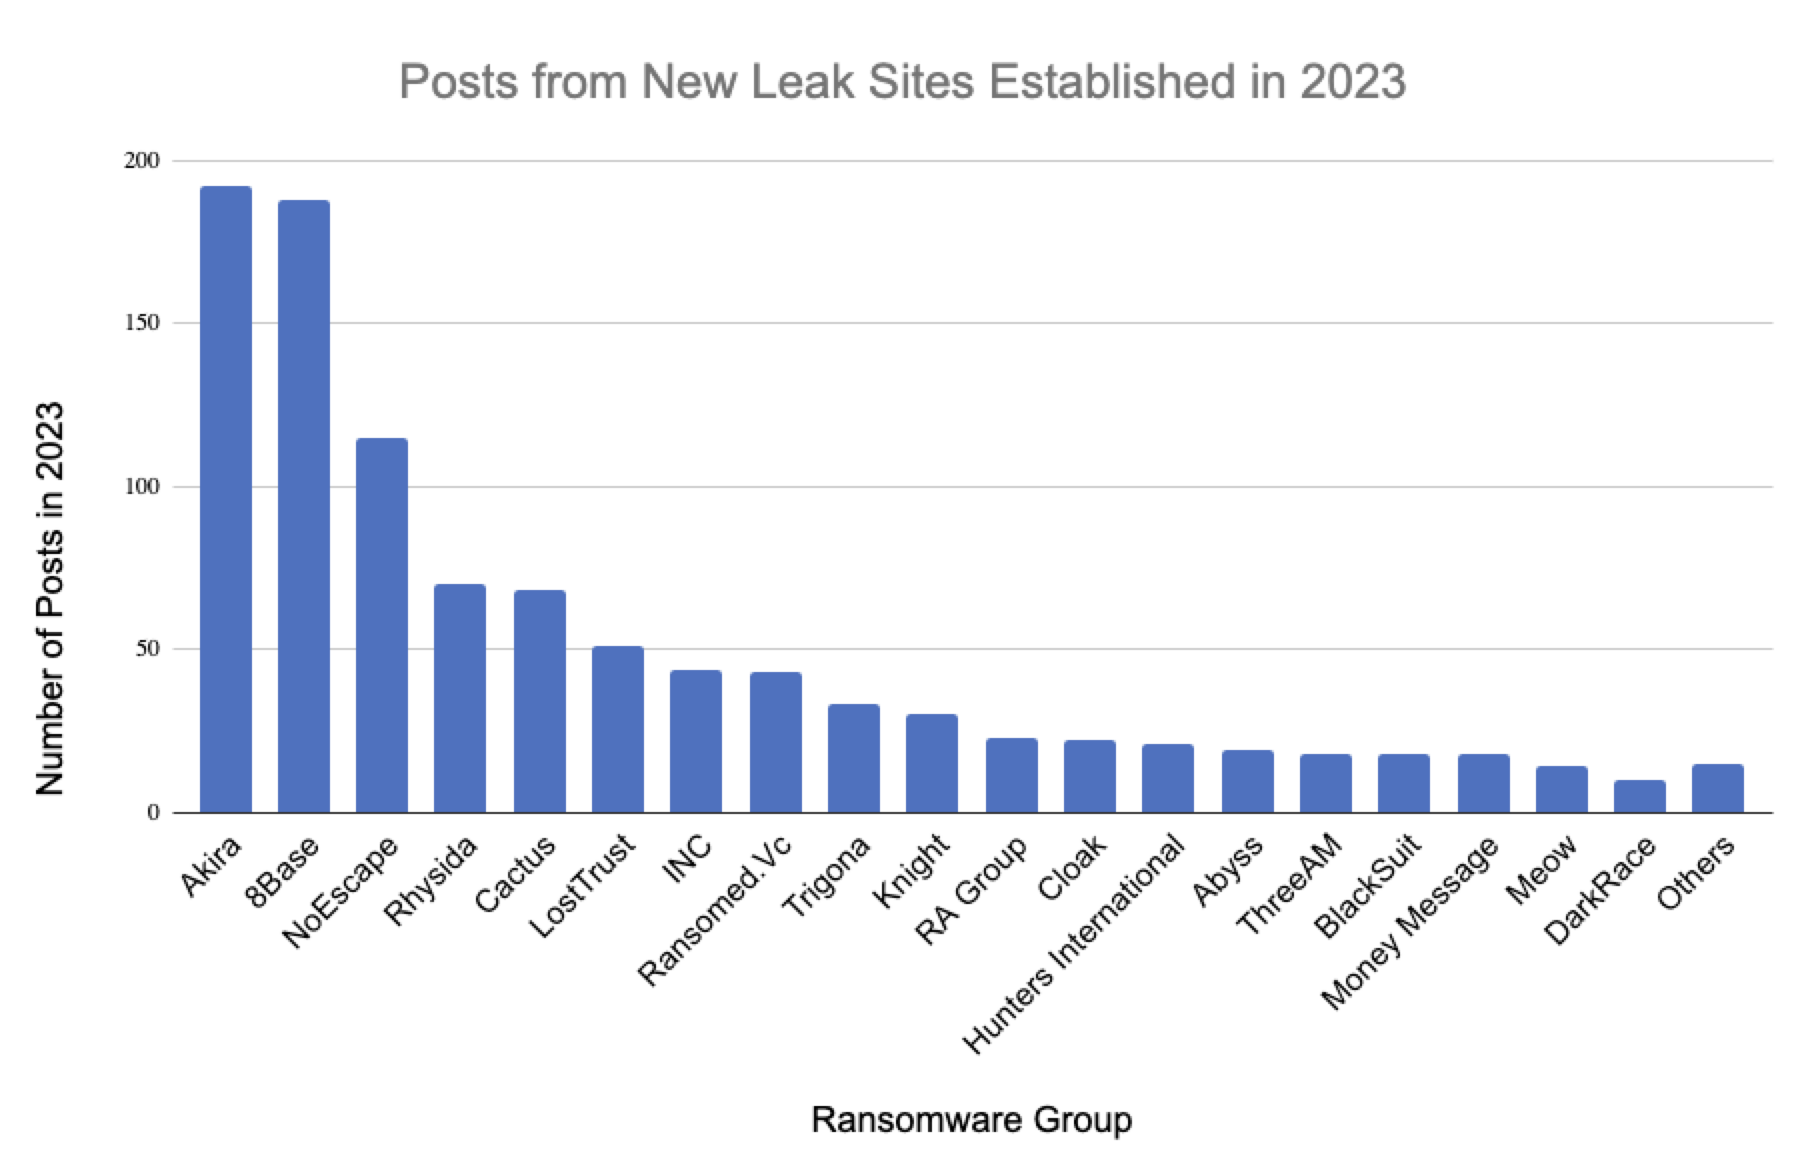 Image 3 is a column chart of post count of new 2023 ransomware leak sites. The top three posts are from Akira, 8Base, NoEscape. 